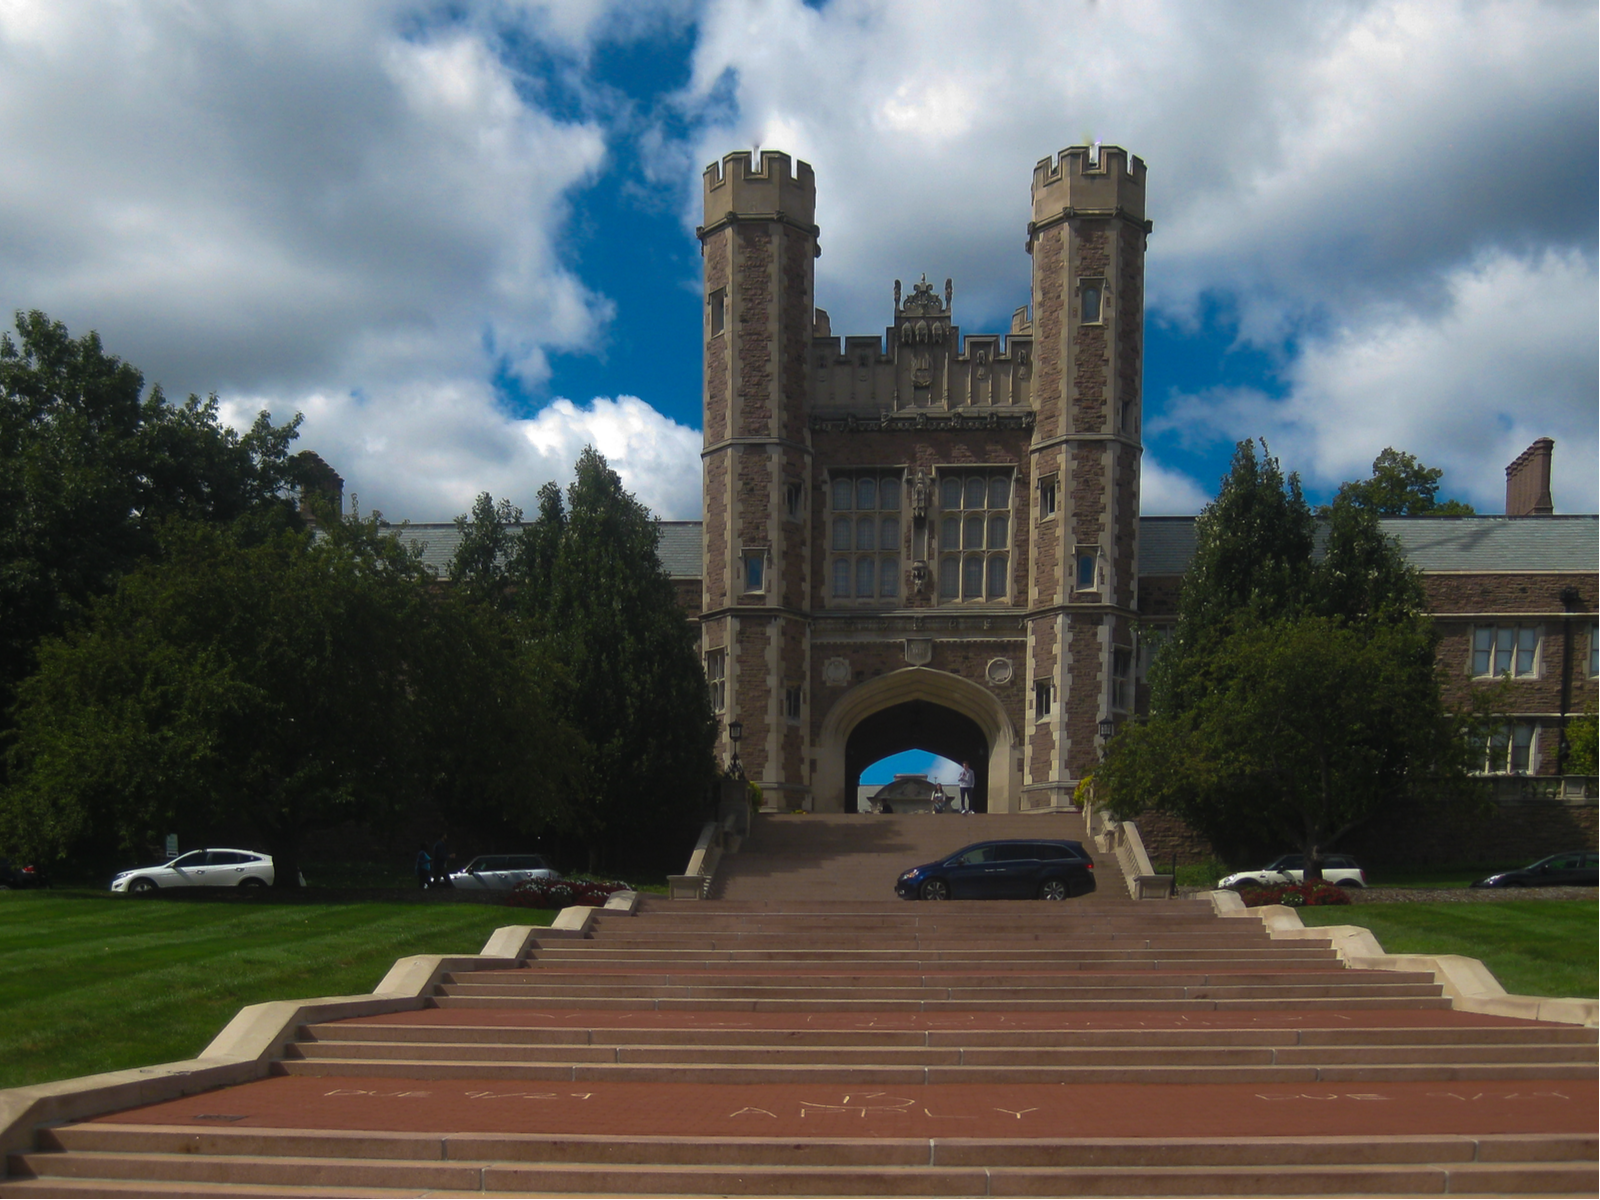 Cars passing by a road intersecting a stairs in front of a historic structure at Washington University in St. Louis in Missouri, named as one of the most beautiful college campuses